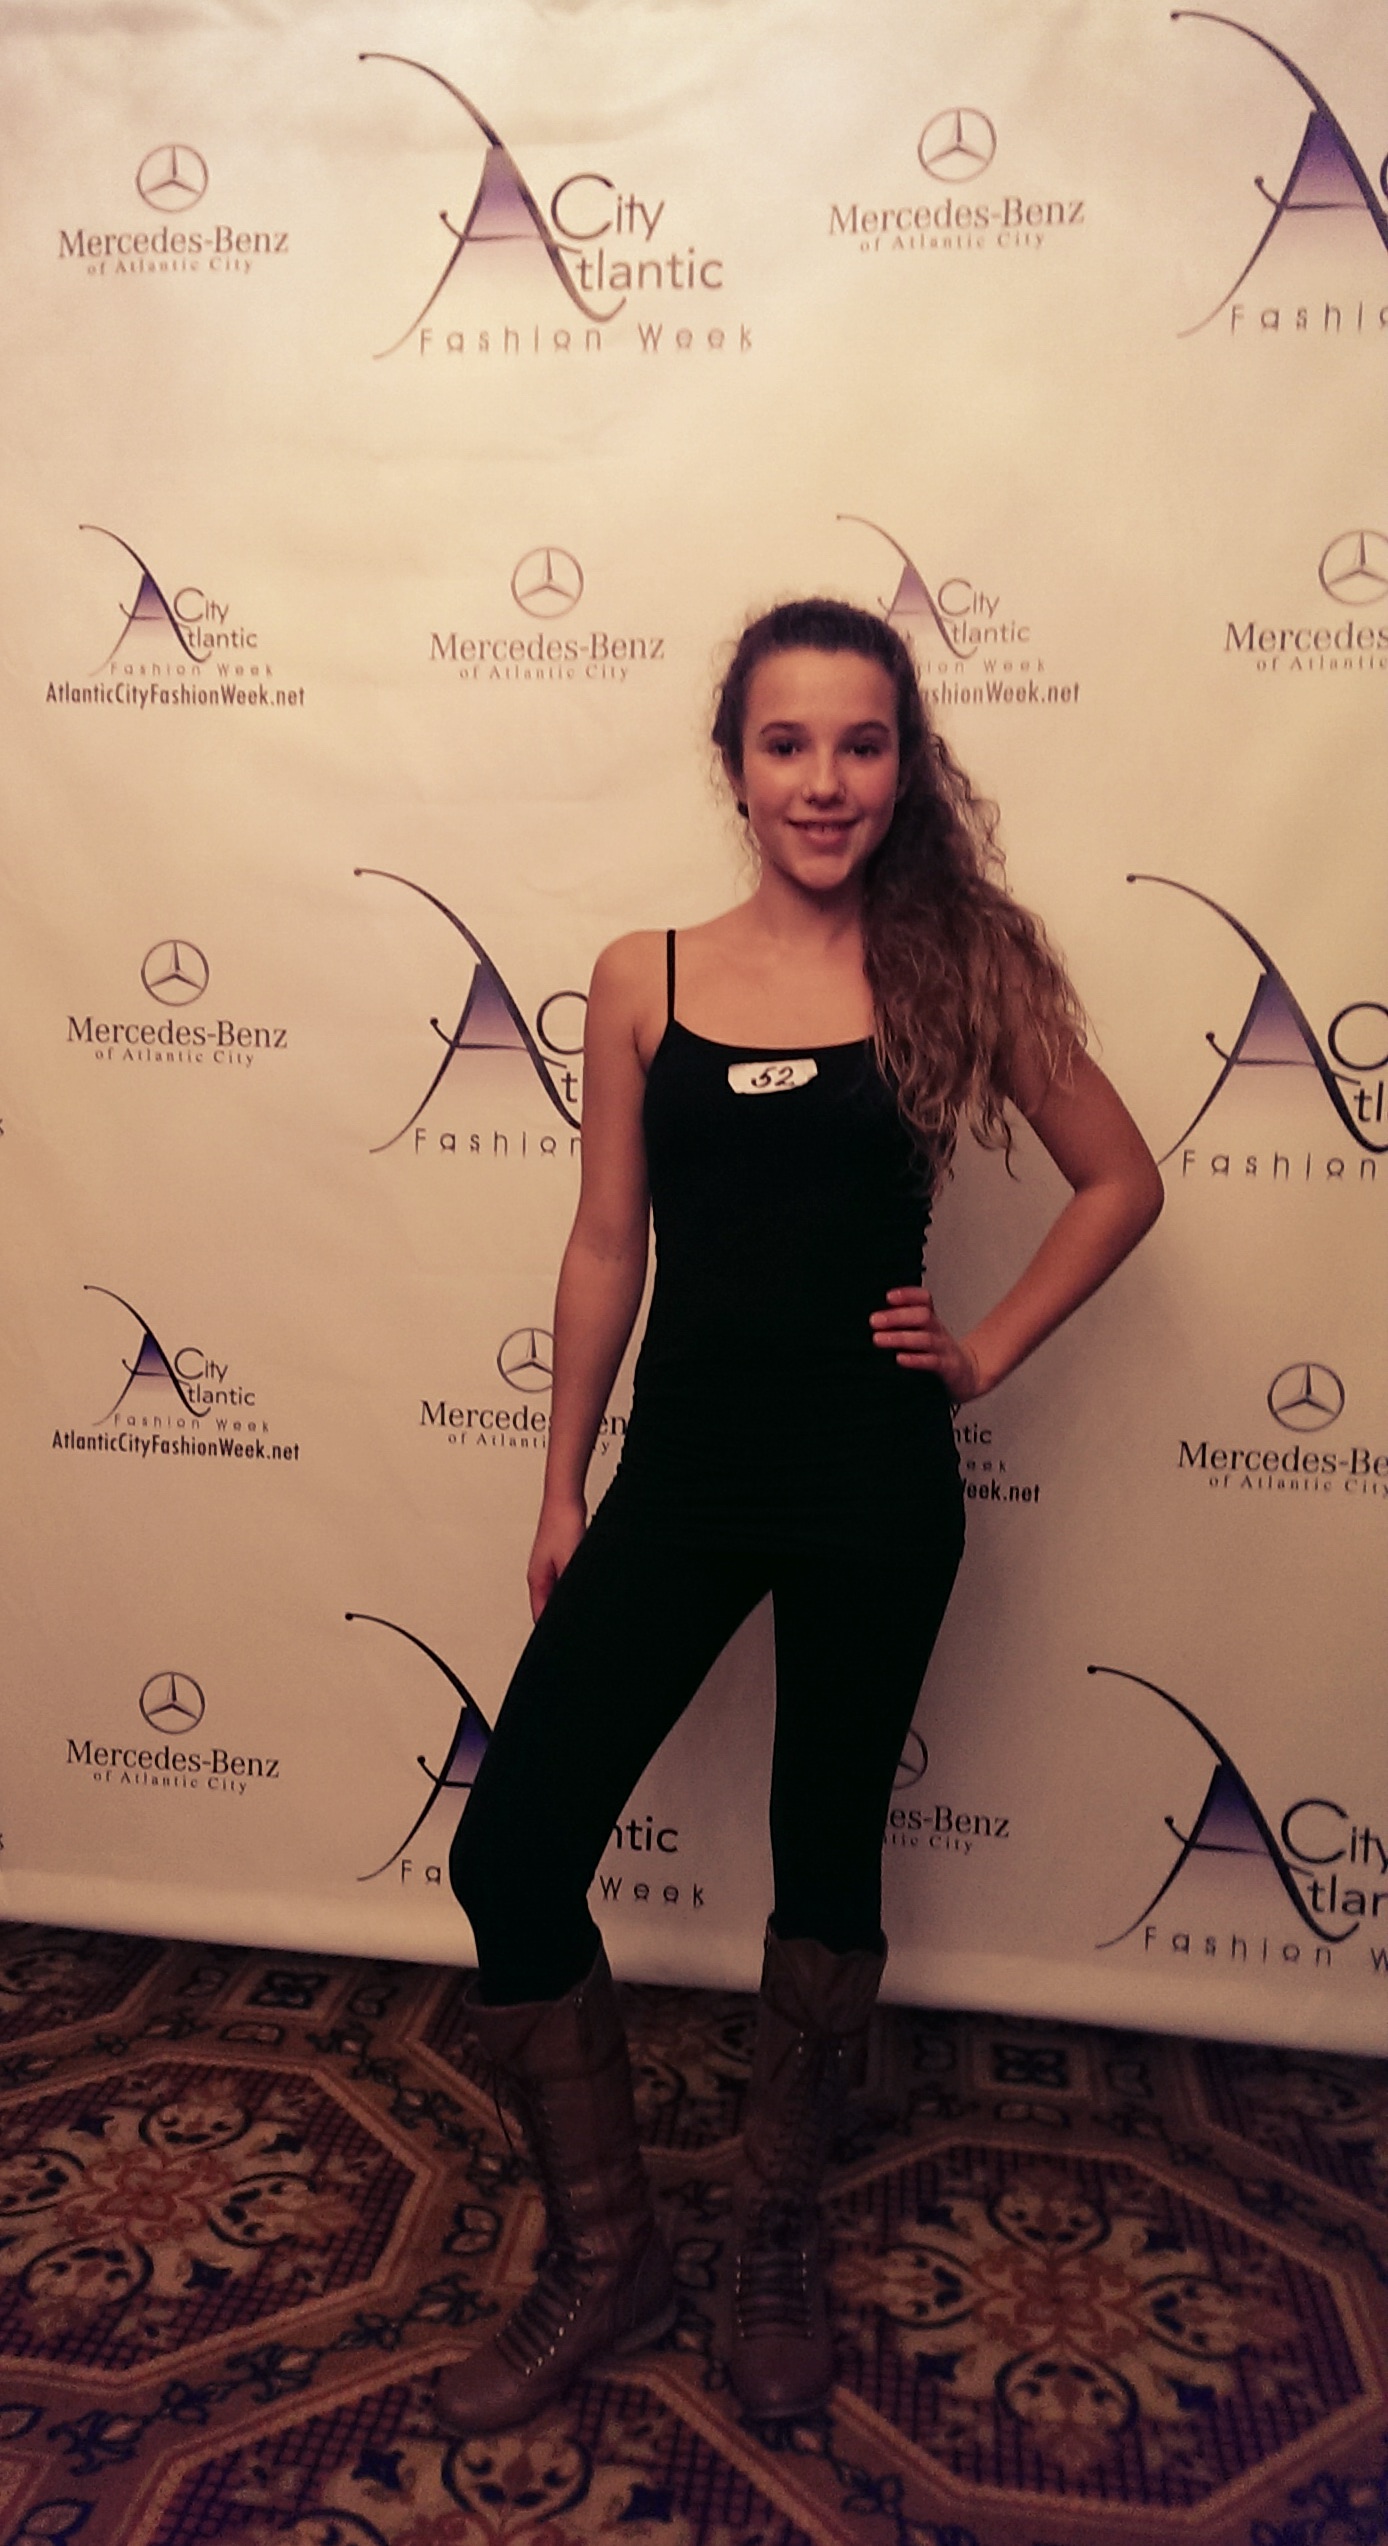 Atlantic City Fashion Week Auditions (sponsored by Mercedes-Benz) - Her 1st time out for runway opportunity. Leila booked to walk with Lainy Gold Designs and another major label!